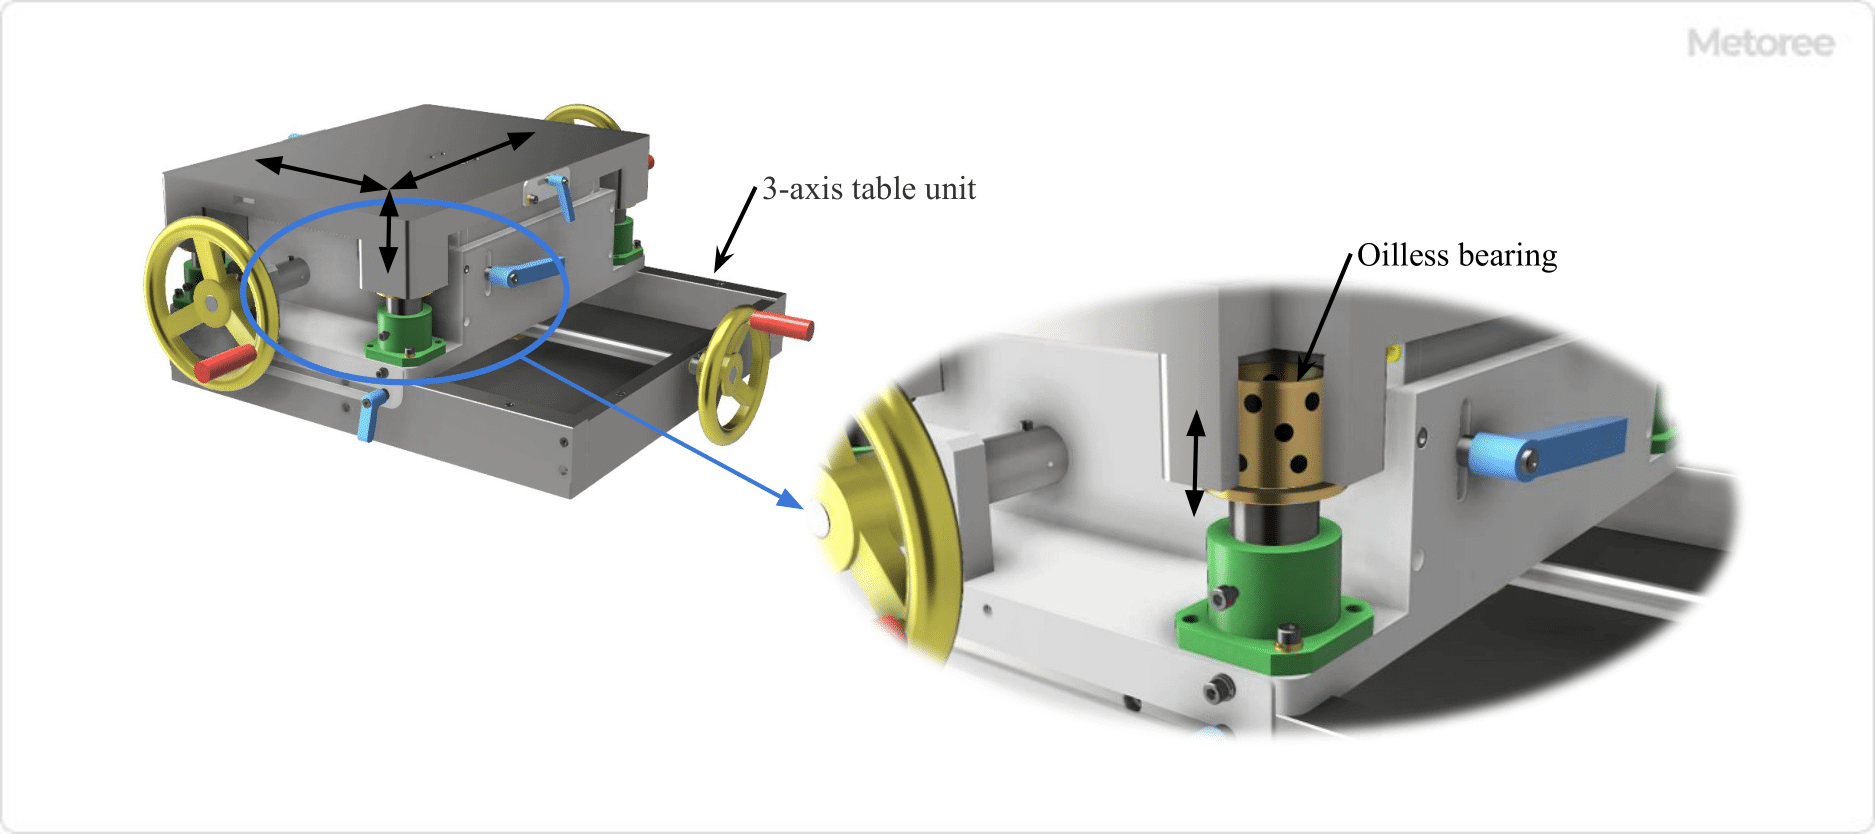 Figure 1. Example of oilless bearing use